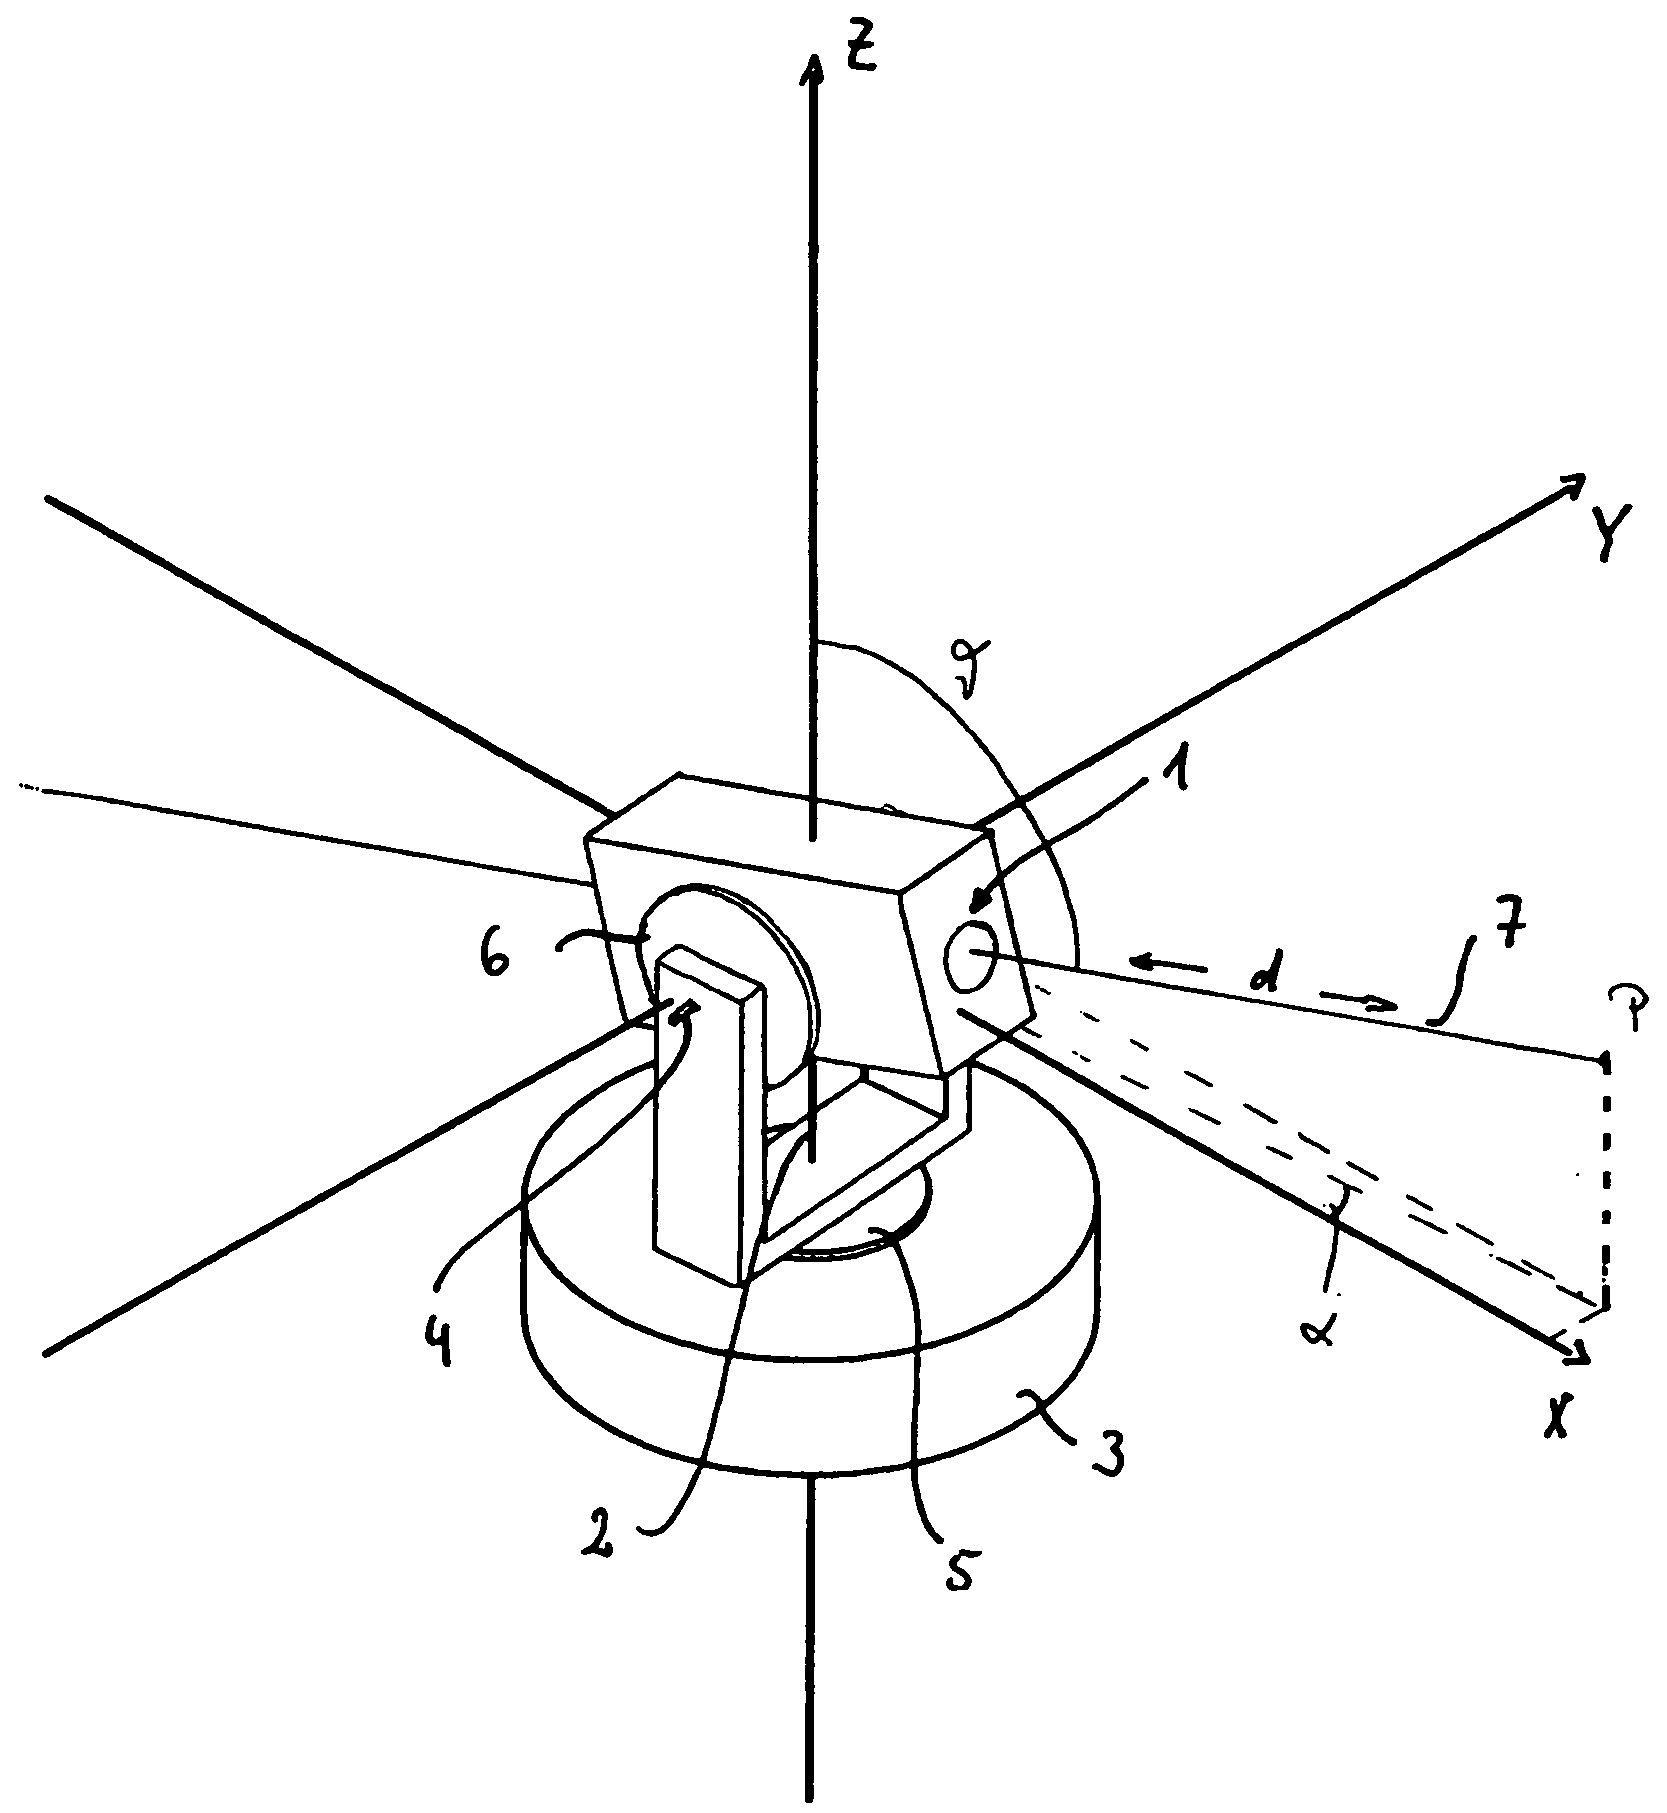 Surveying Instrument and Method of Providing Survey Data of a Target Region Using a Surveying Instrument